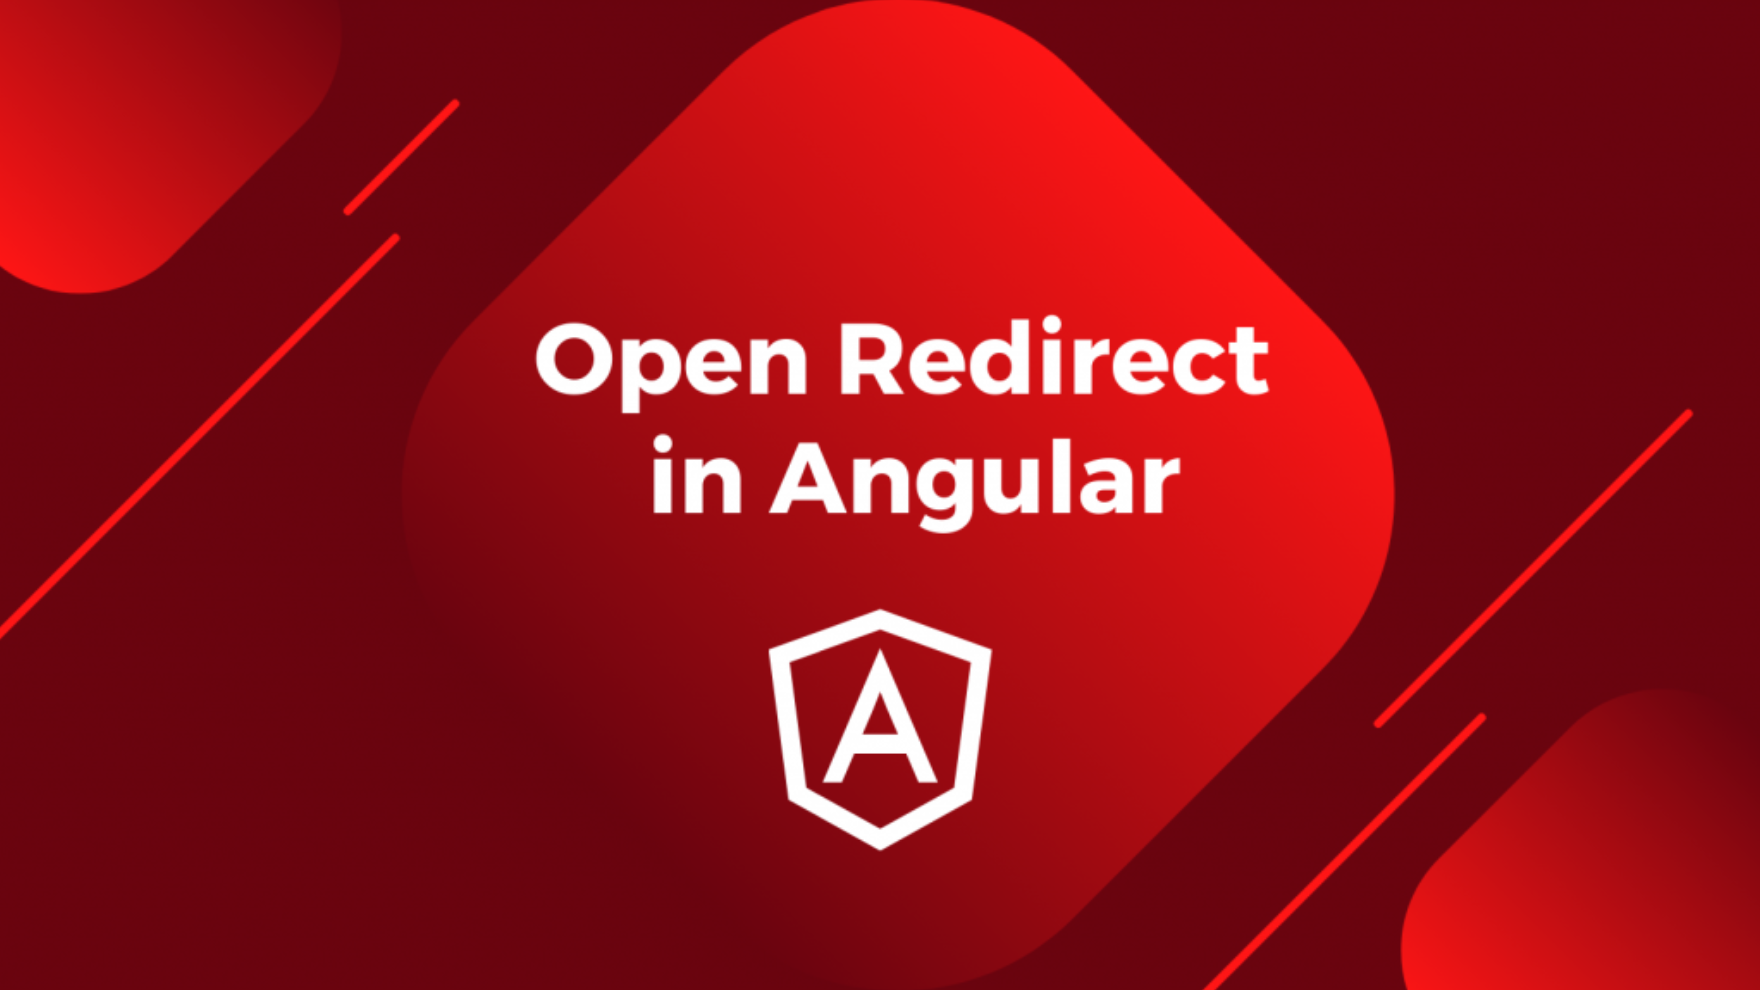 Angular Open Redirect Guide: Examples and Prevention - Picture 1 image